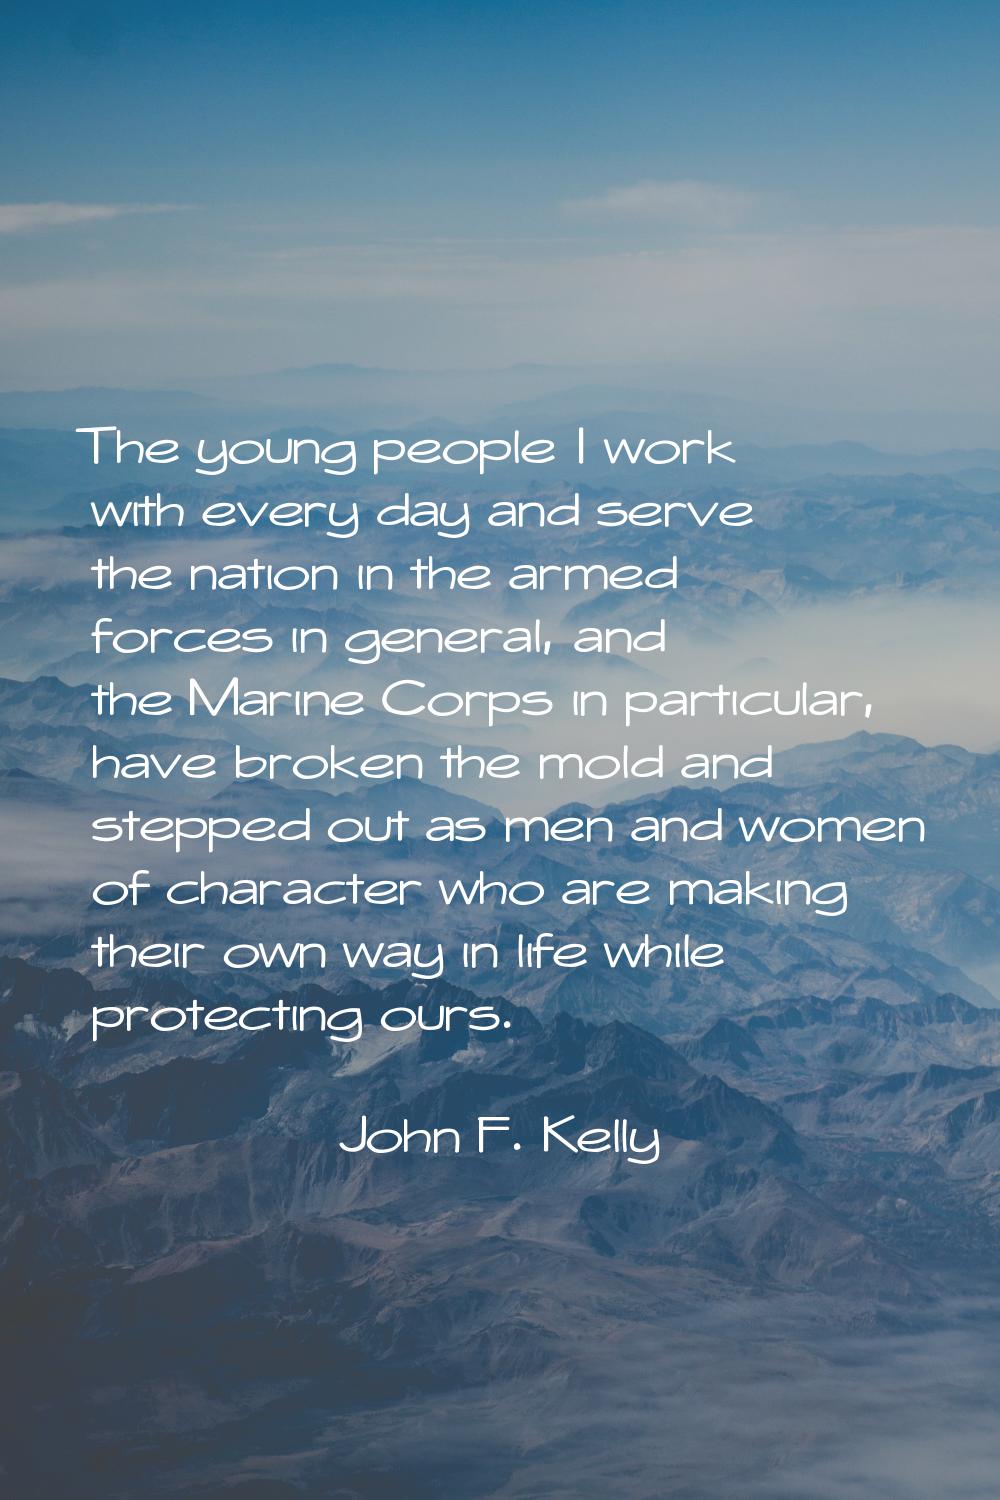 The young people I work with every day and serve the nation in the armed forces in general, and the